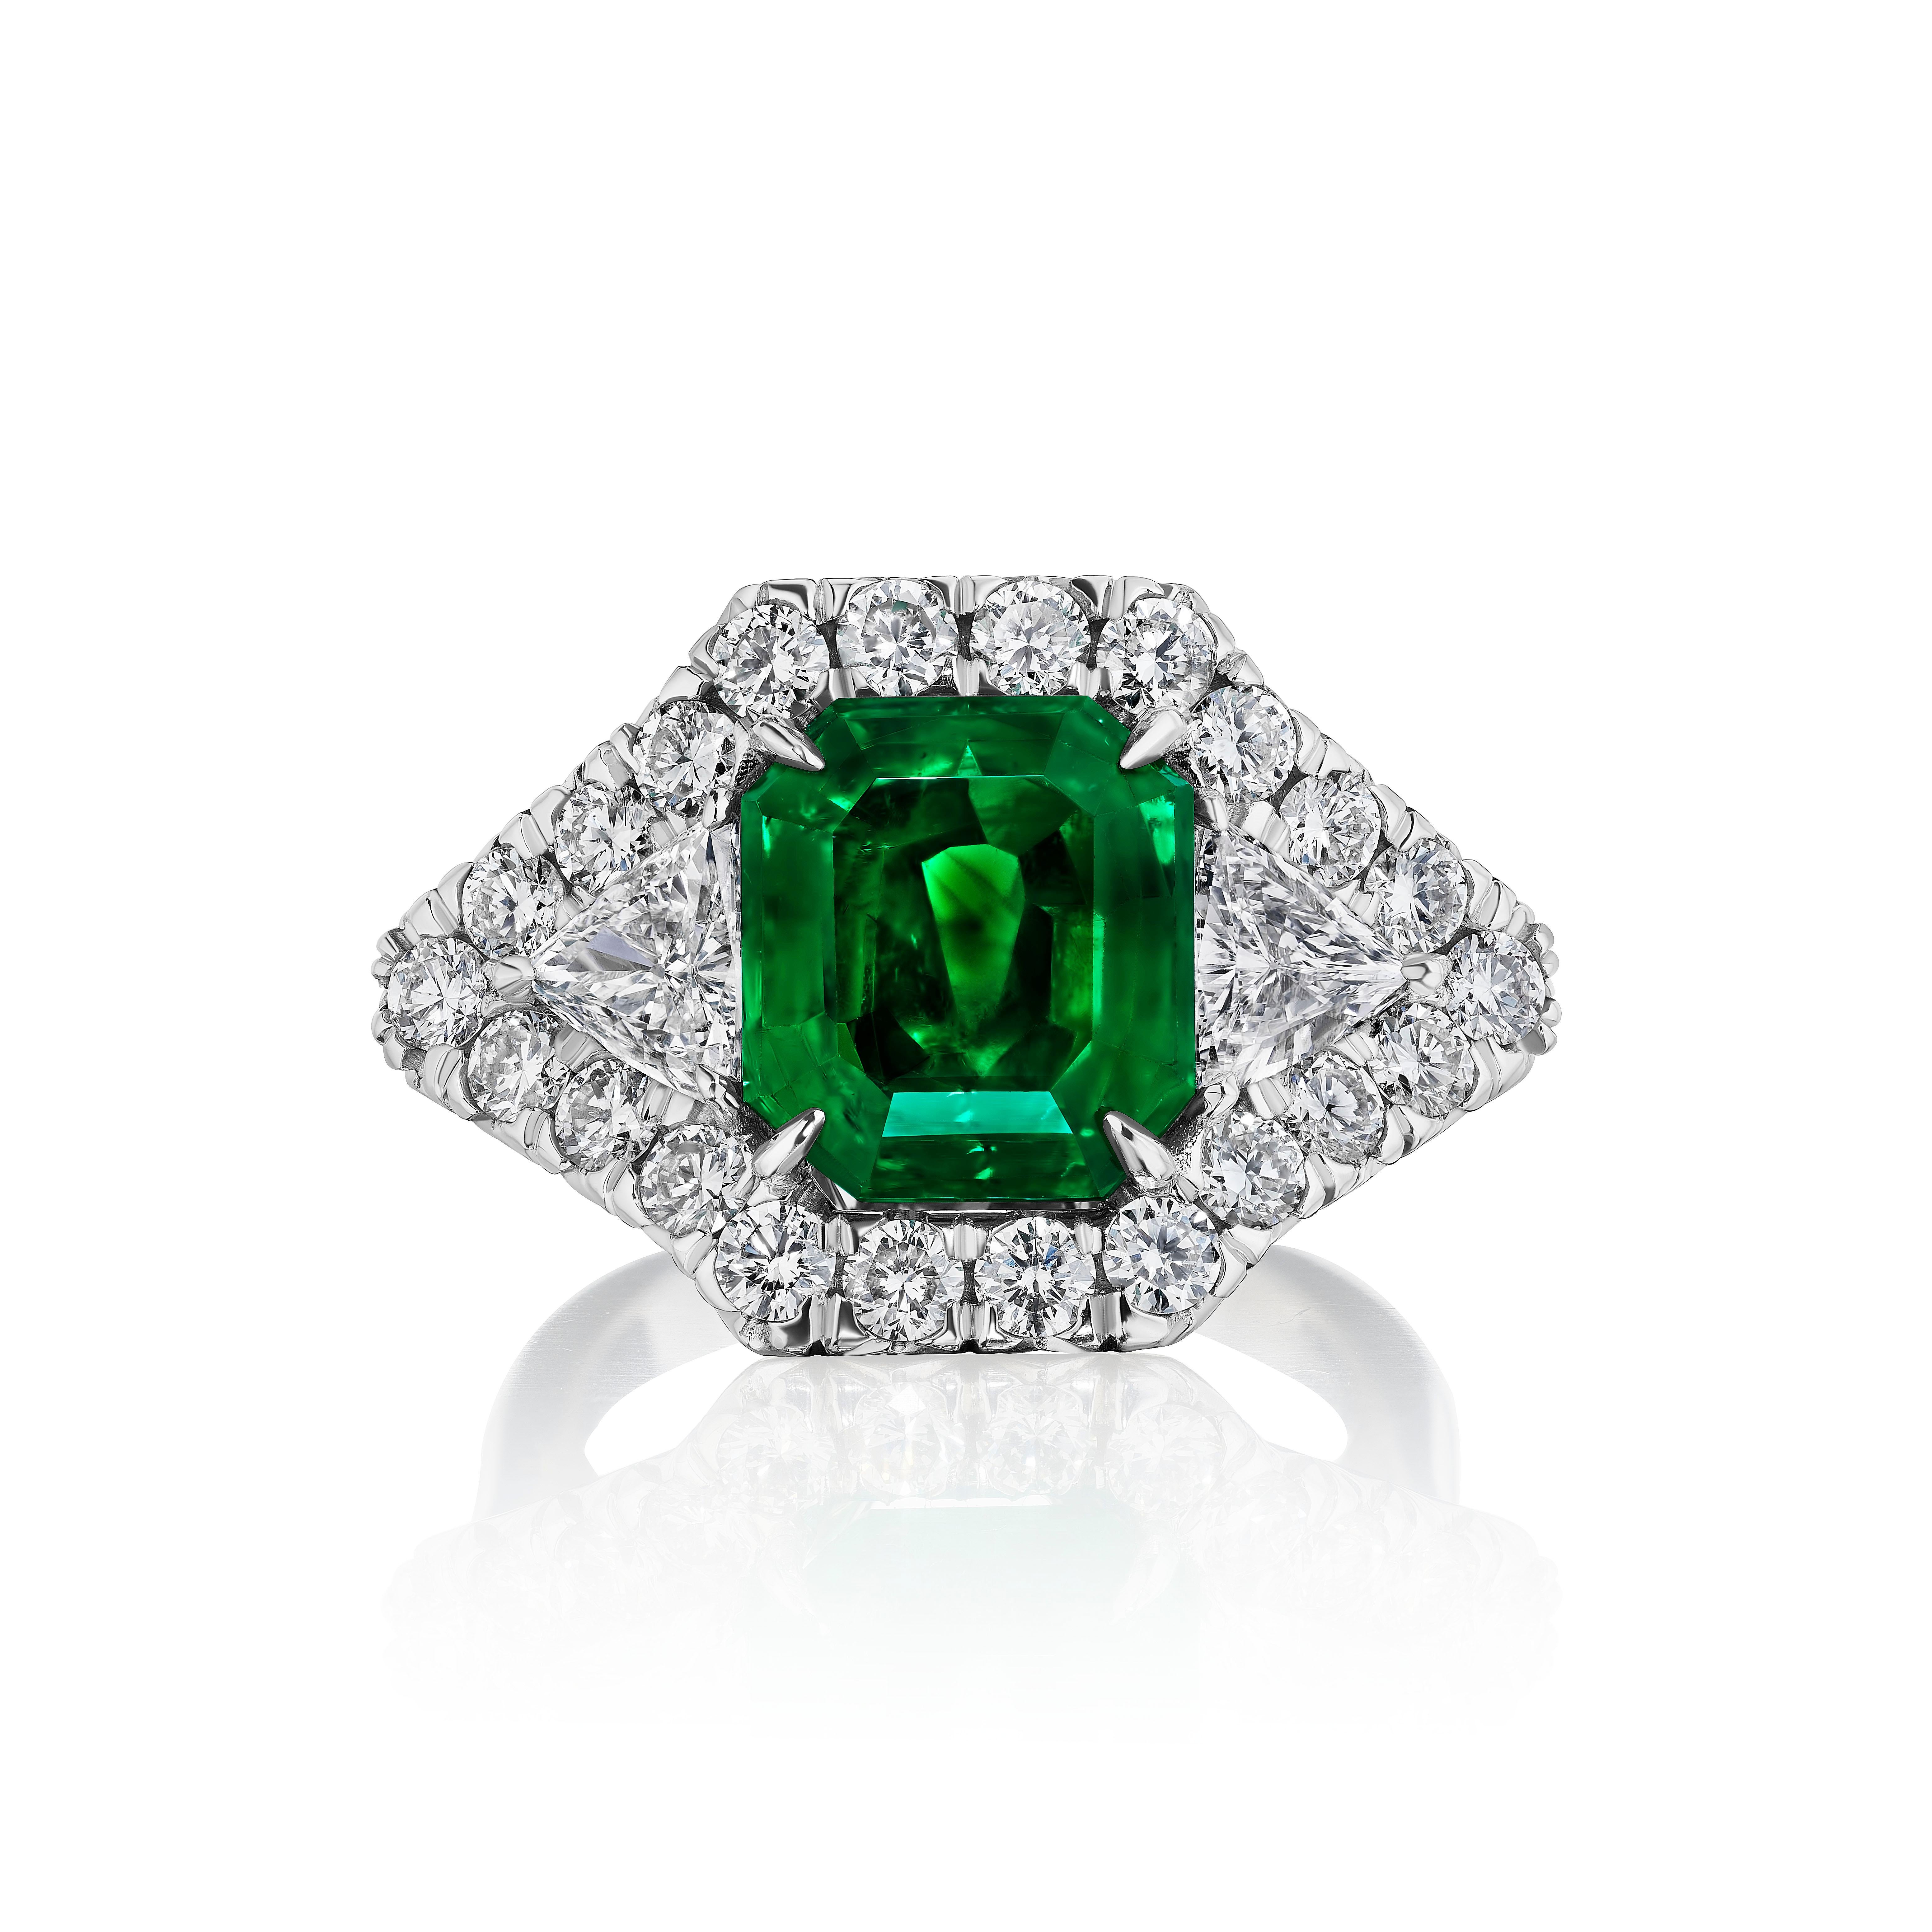 Beautiful Colombian Emerald weighing 4.99 Carats.
Flanked by Triangle Diamonds weighing 0.76 Carats.
Surrounded by 22 Round Diamonds weighing 1.25 Carats.

Emerald certified by GIA.

Set in Platinum. Size 6.